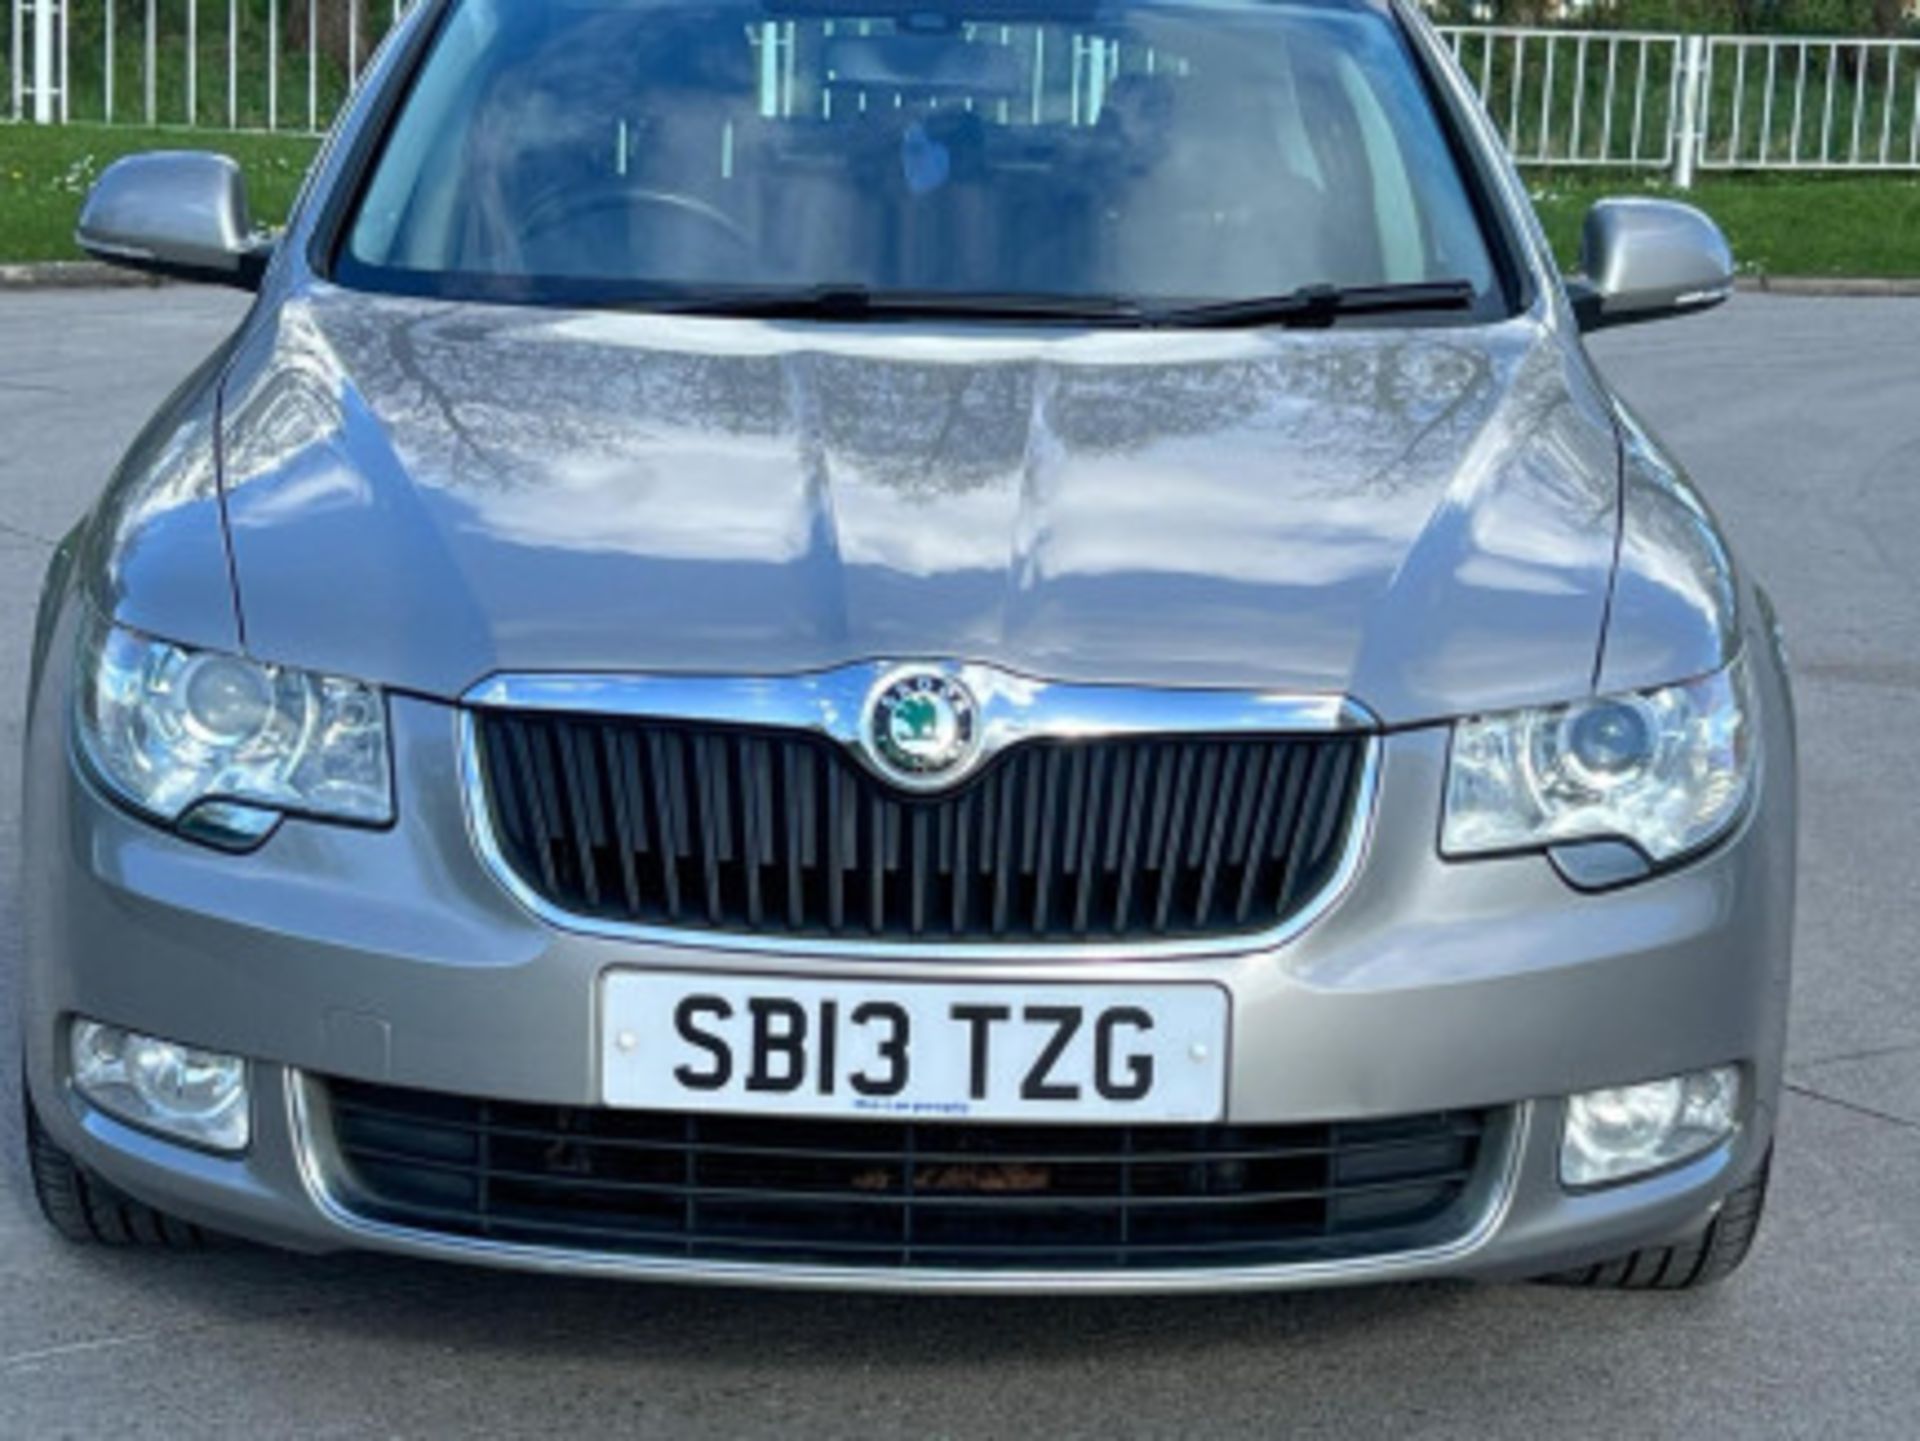 >>--NO VAT ON HAMMER--<<STYLISH AND RELIABLE SKODA SUPERB 1.6 TDI S GREENLINE II EURO 5 - Image 57 of 141